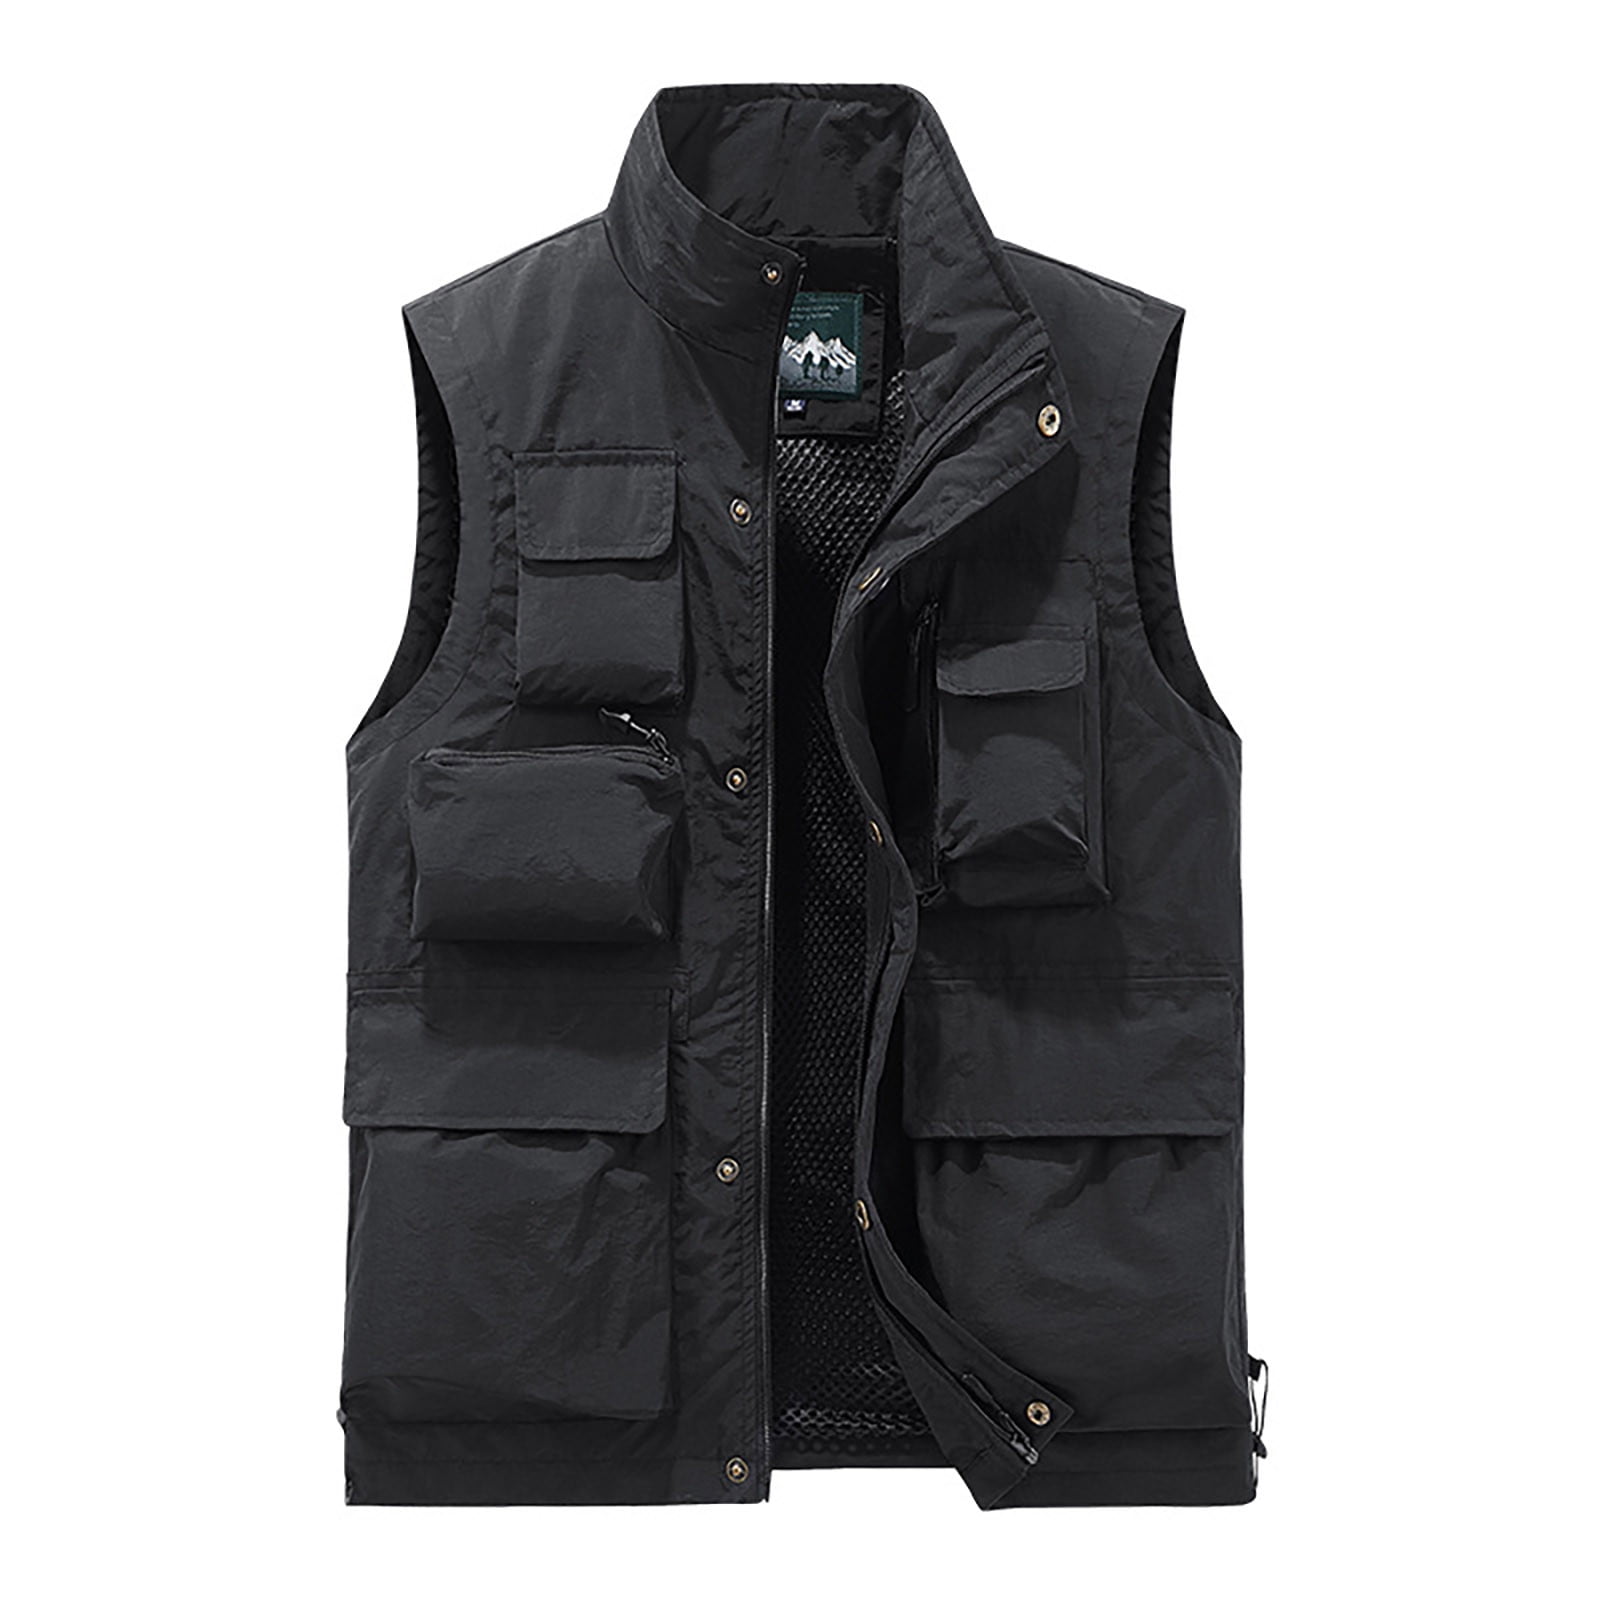 XFLWAM Men's Cargo Utility Vest Travel Fishing Work Outdoor Safari Vest  Jackets with Pockets Casual Quick-drying Loose Hiking Vest Black 4XL